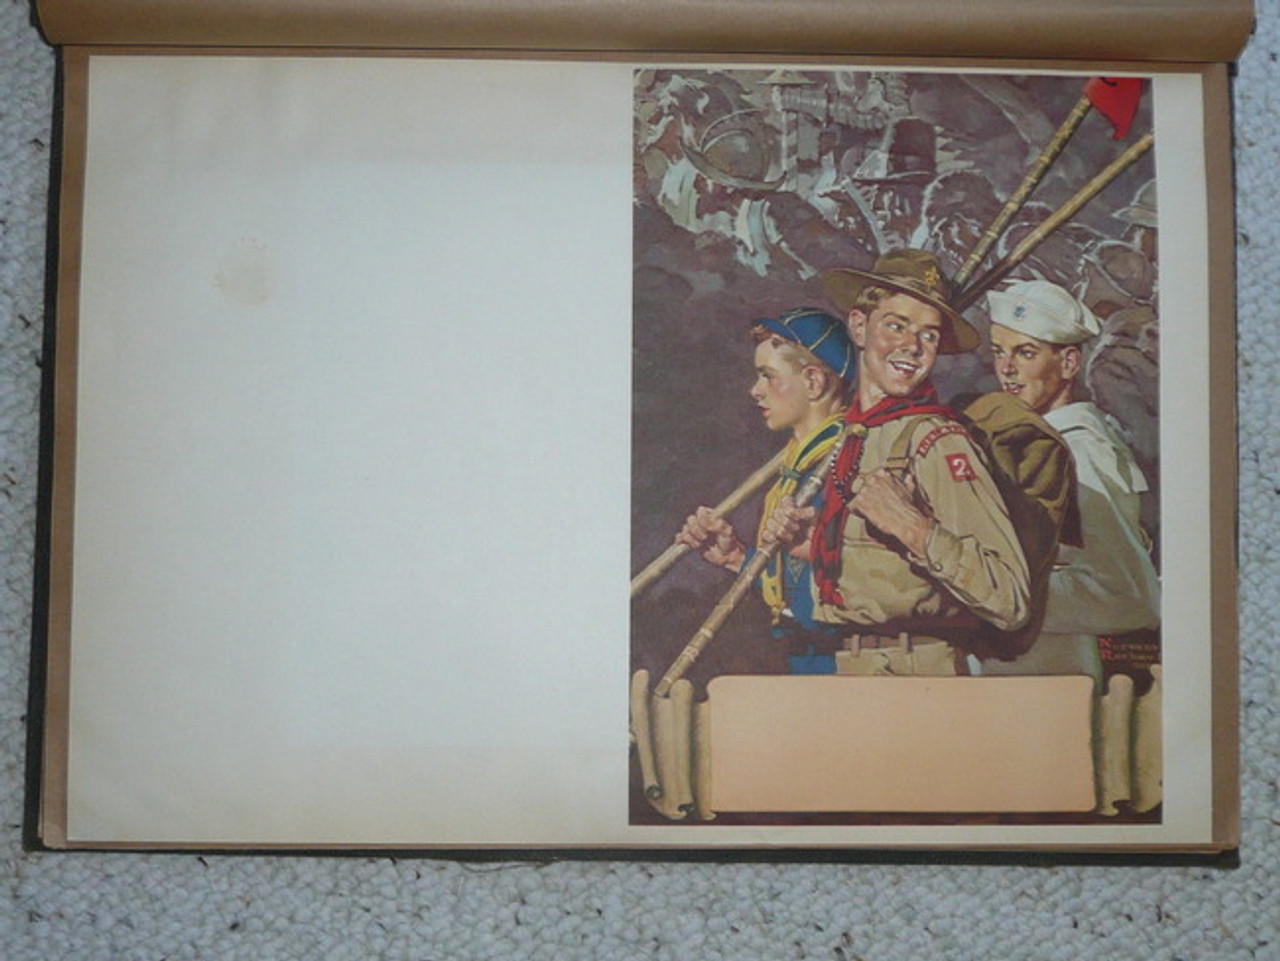 1940's Norman Rockwell Program Cover Of Cub Scout, Boy Scout, and Sea Scout, 11.5"x16" Affixed to Scrapbook Paper, Excellent Condition, Affixed to Scrapbook Paper